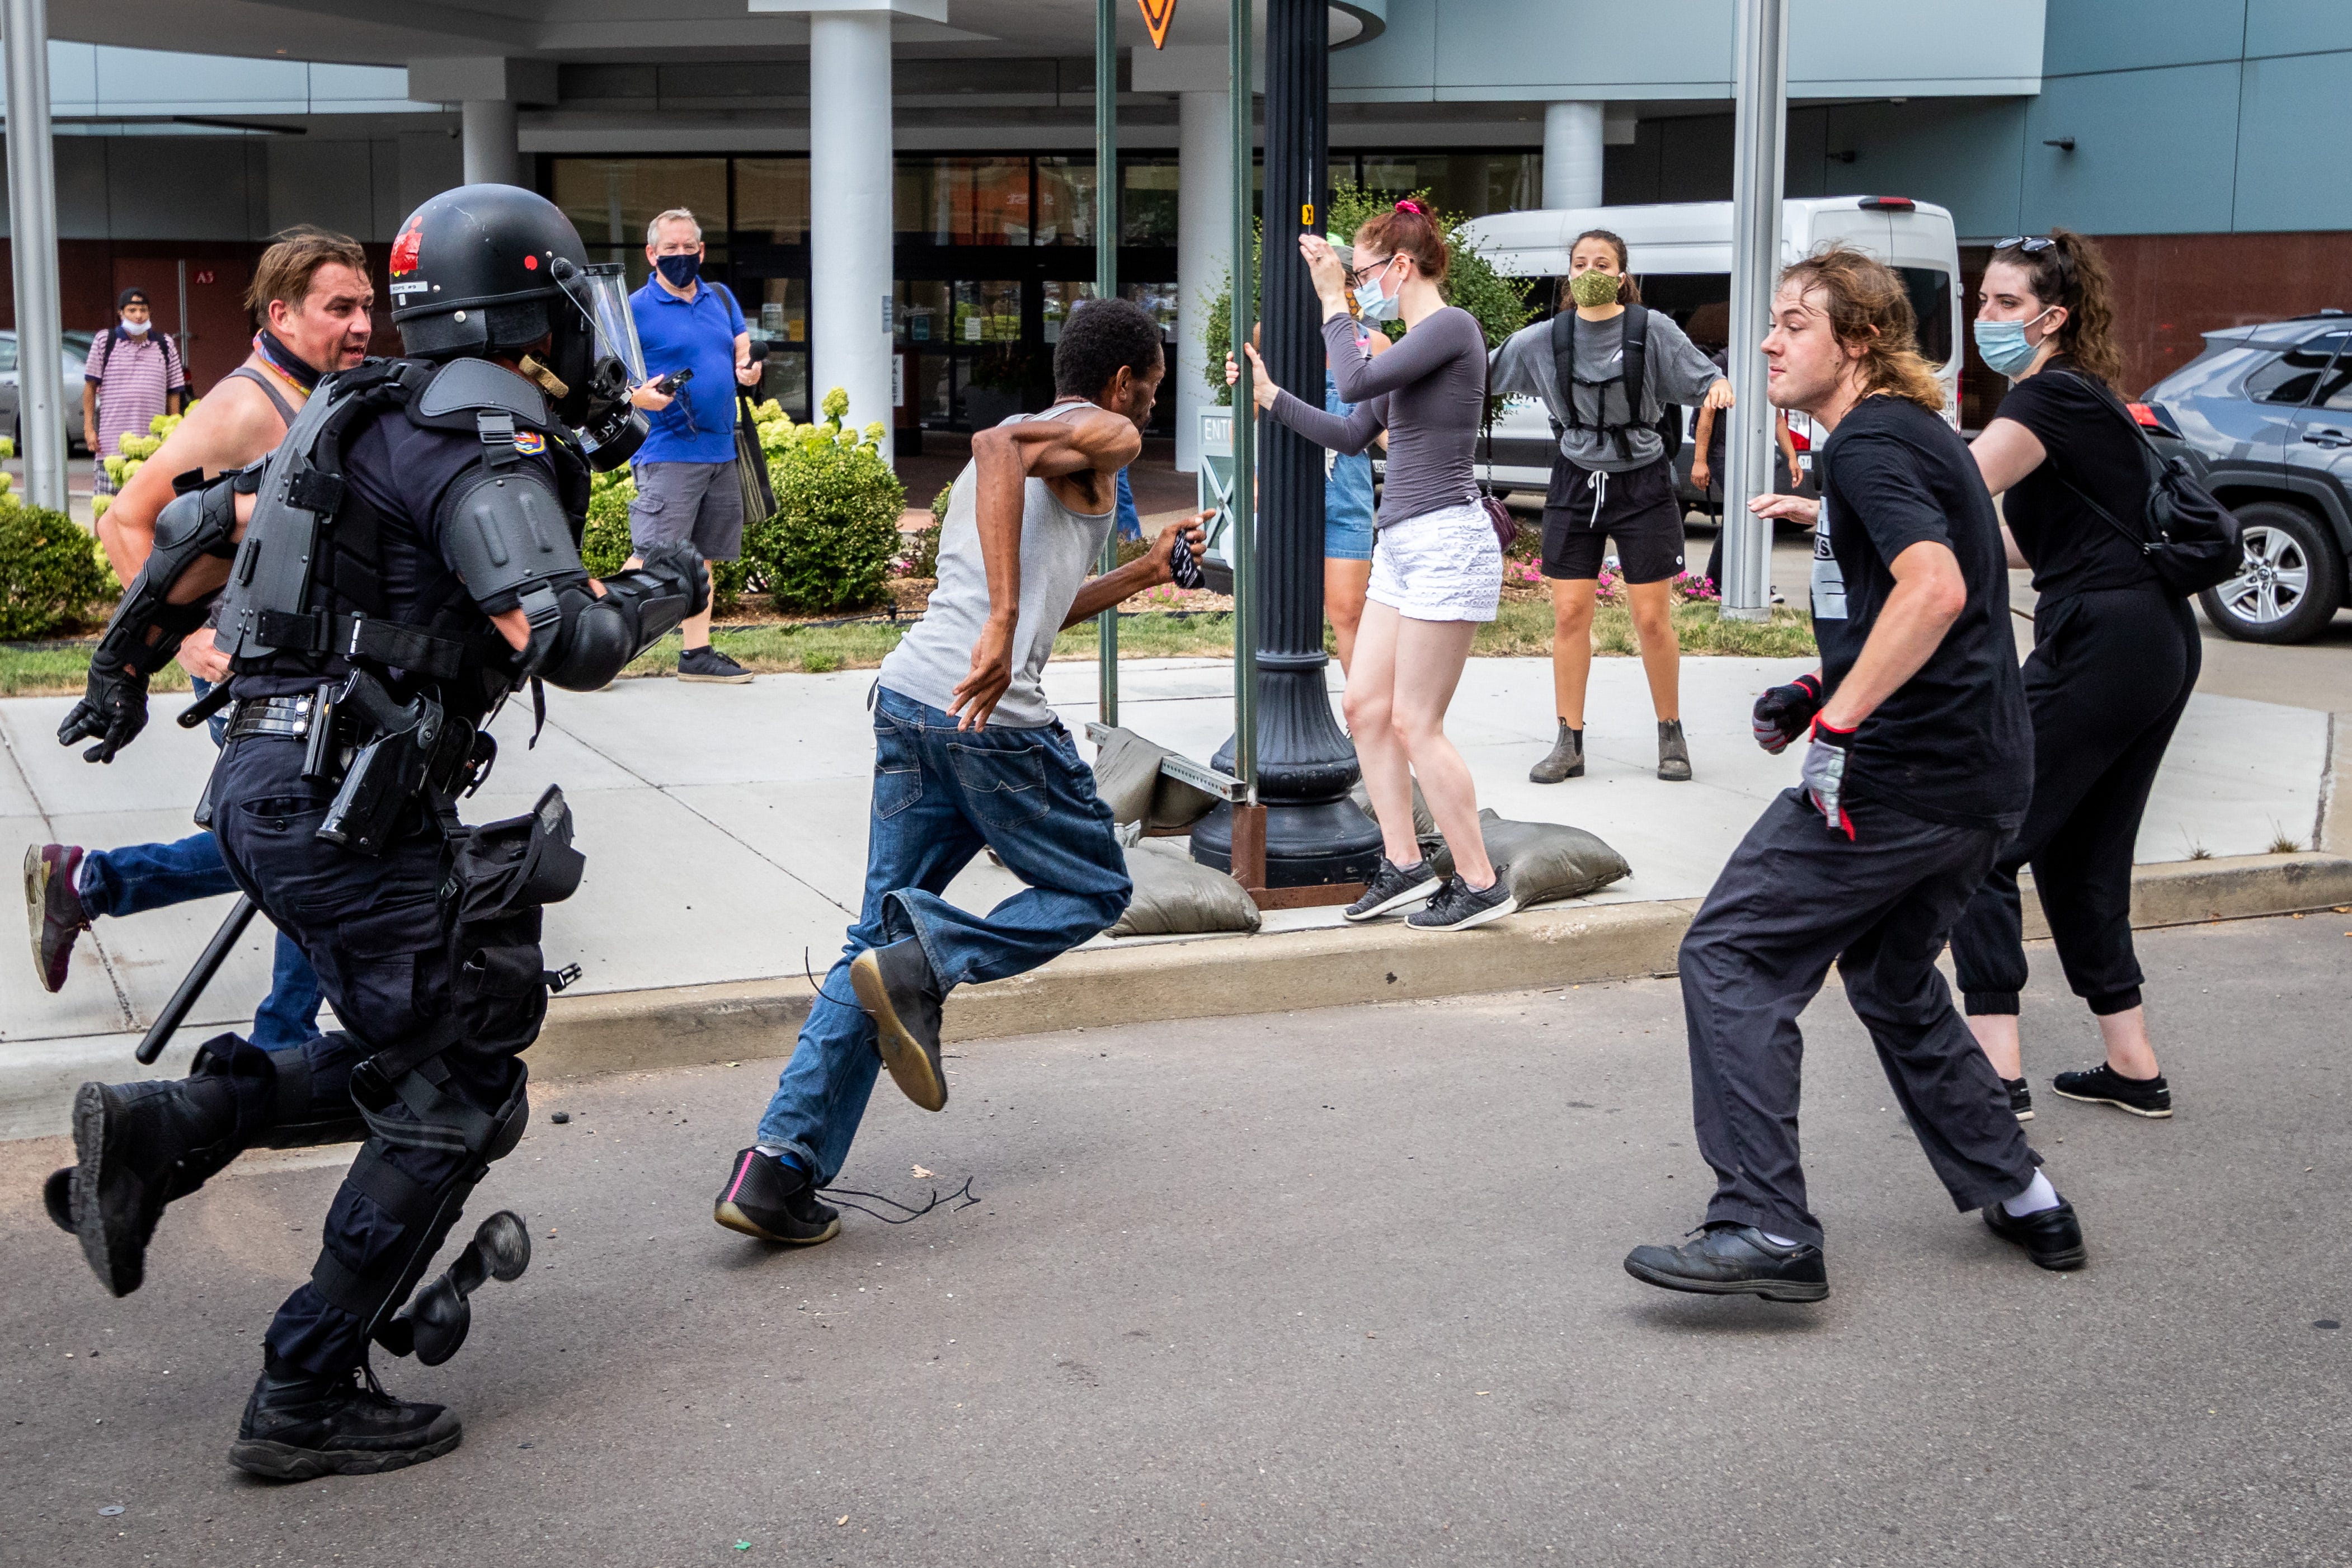 Kalamazoo Police chase a counter-protestor. Members of Proud Boys, antifa, and a local church clash with each other and local and Michigan State Police at Arcadia Creek Festival Plaza in Kalamazoo on August 15, 2020.